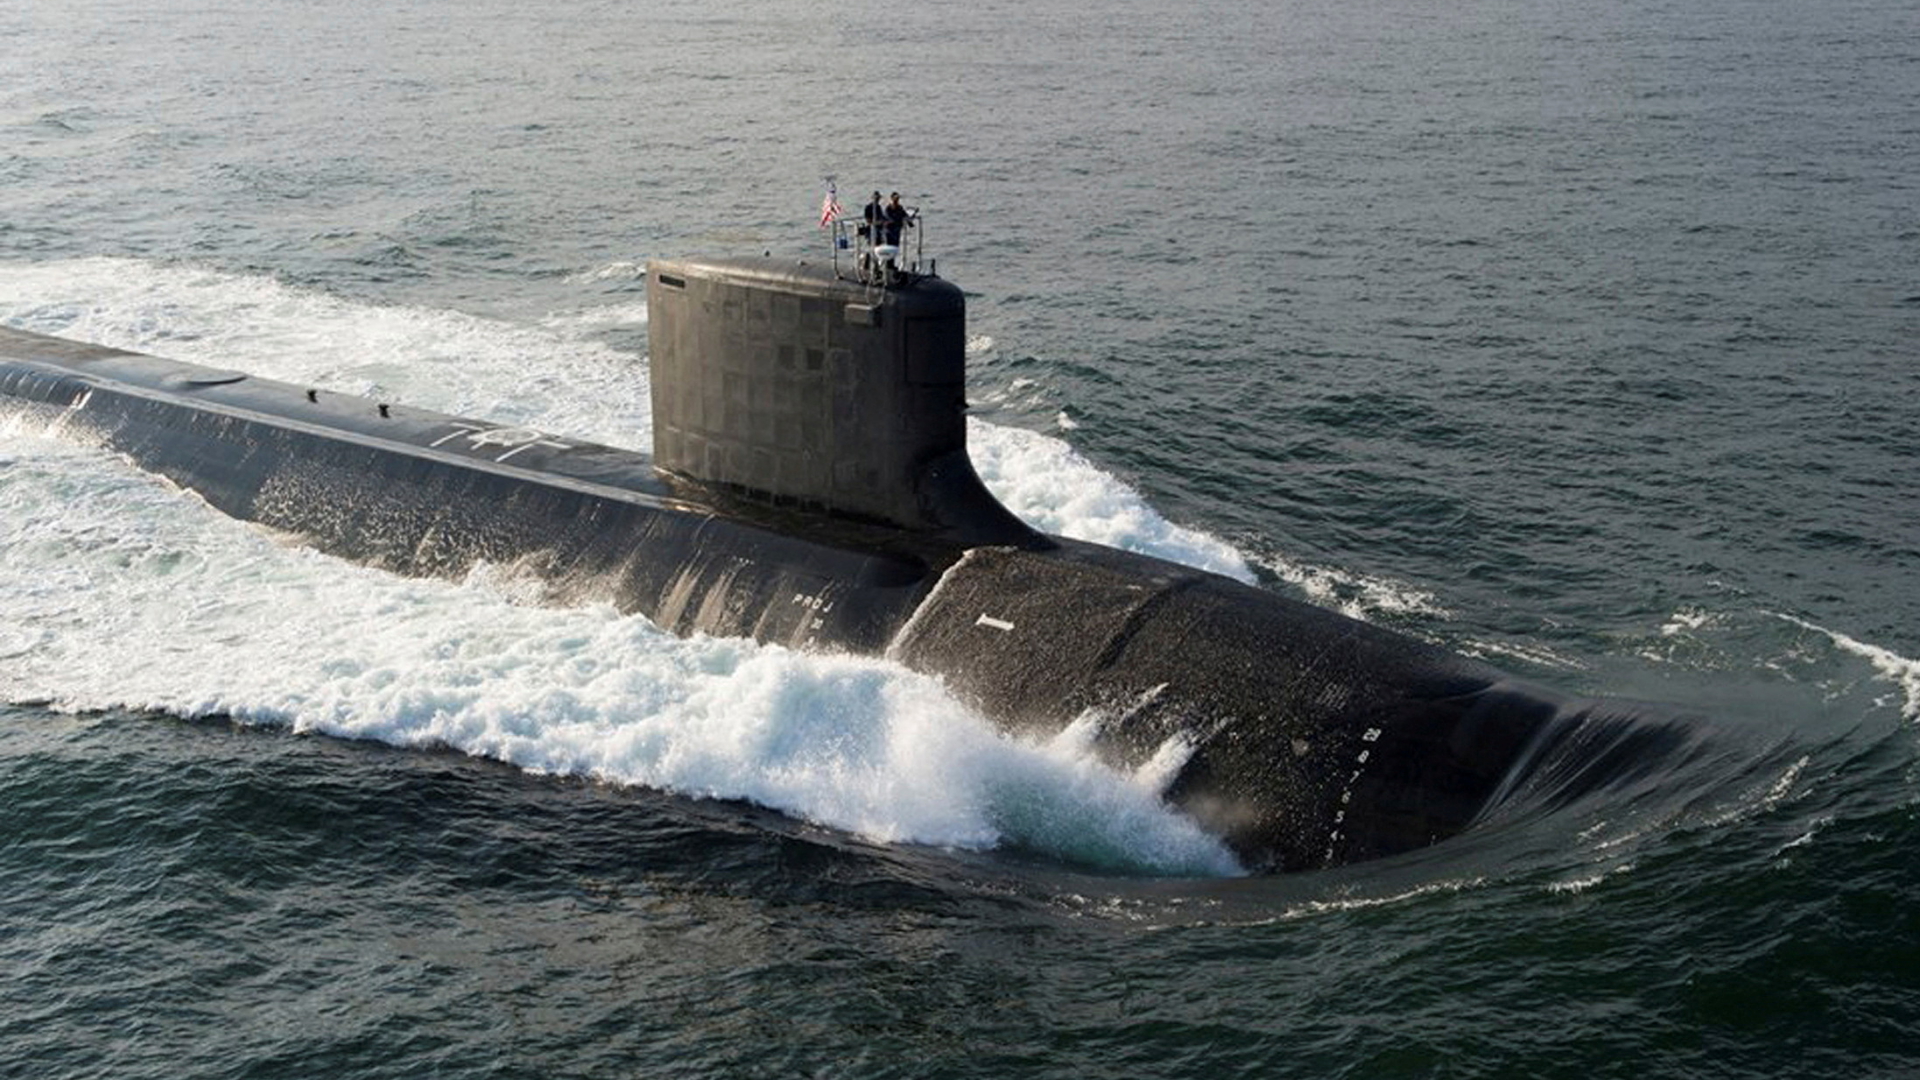 Strategic cooperation: the United States provides Australia with nuclear submarines